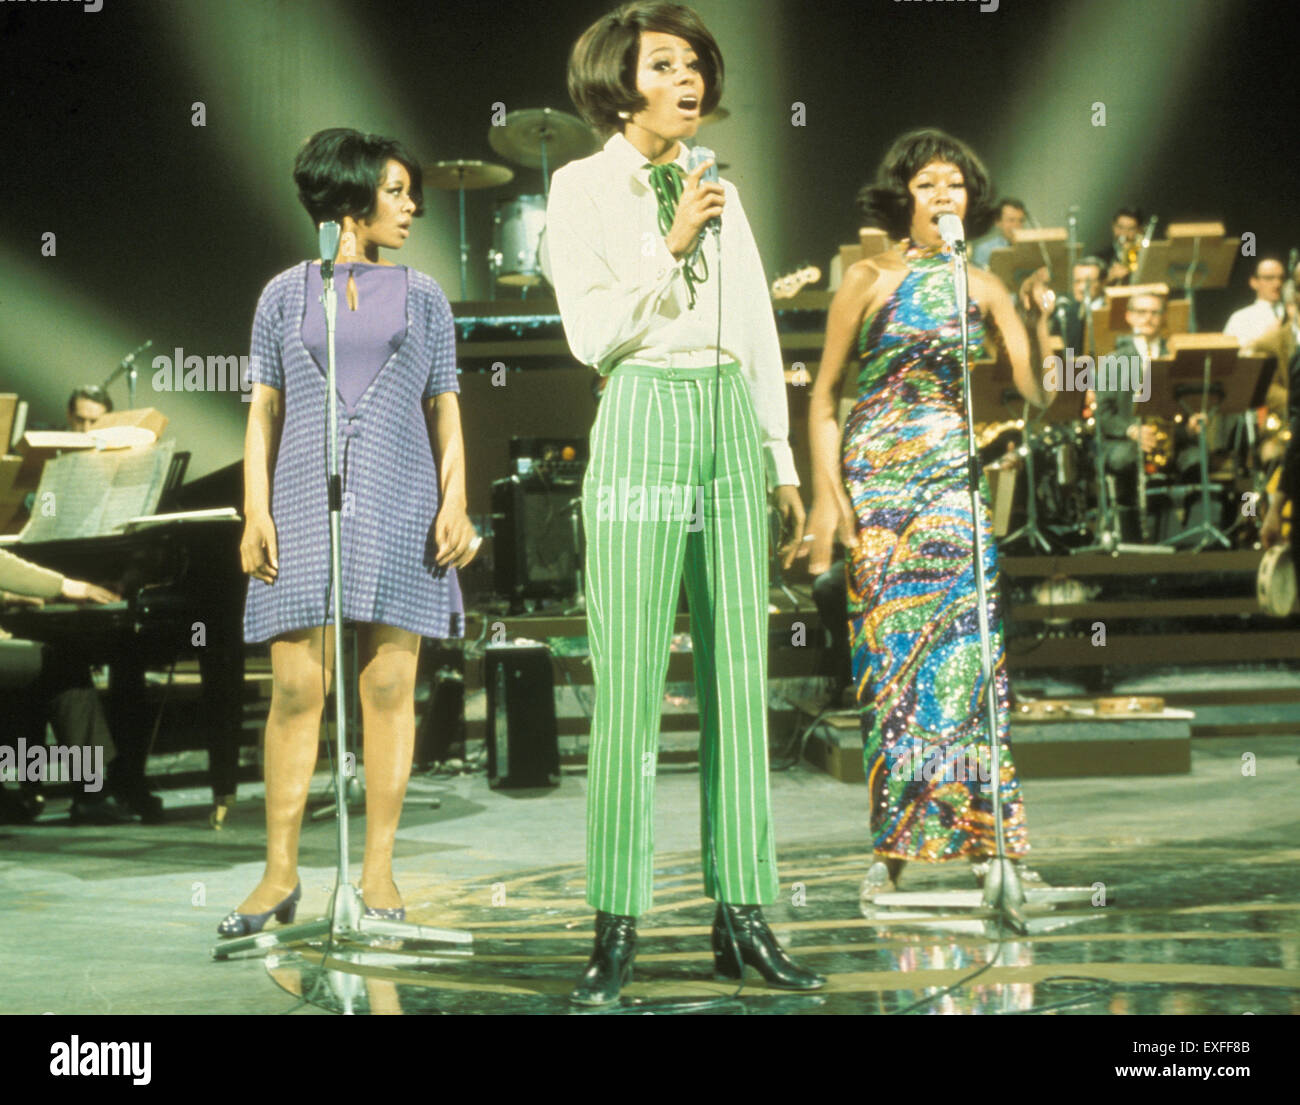 THE SUPREMES  US vocal group about 1969 with Diana Ross front, Cindy Birdsong at left and Mary Wilson Stock Photo